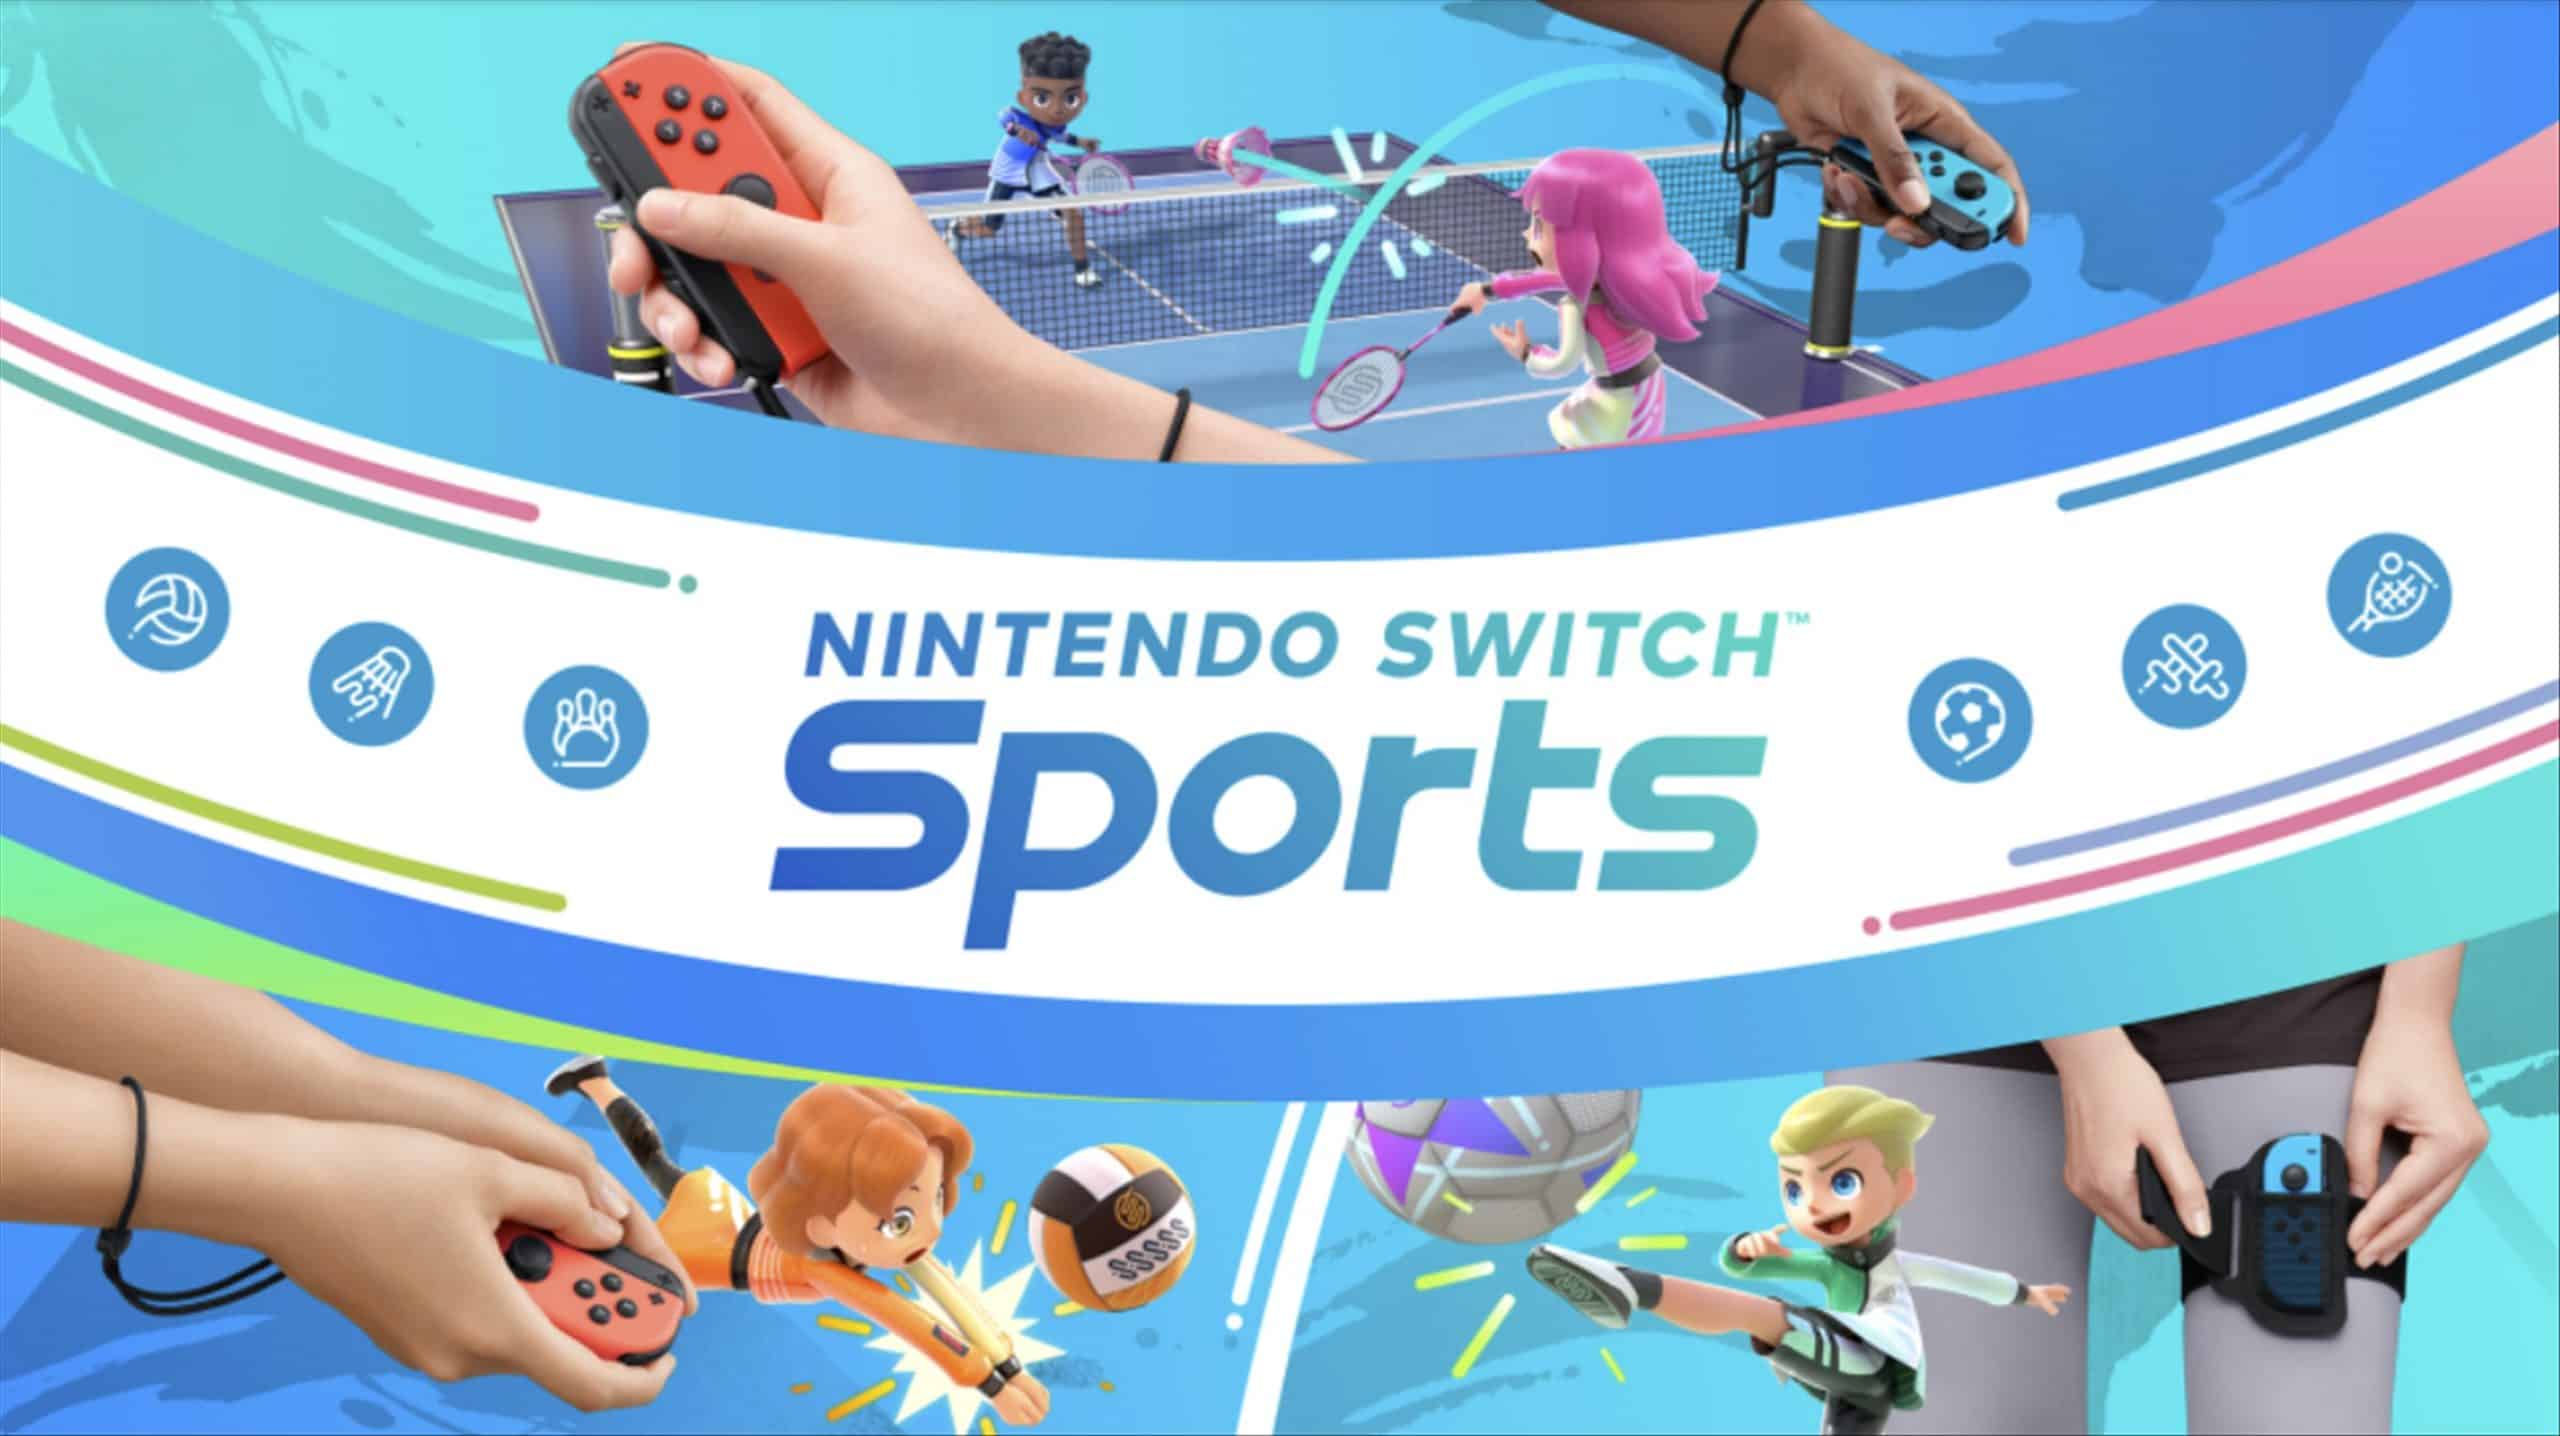 Best Nintendo Switch game to play together with friends – Nintendo Switch Sports Review